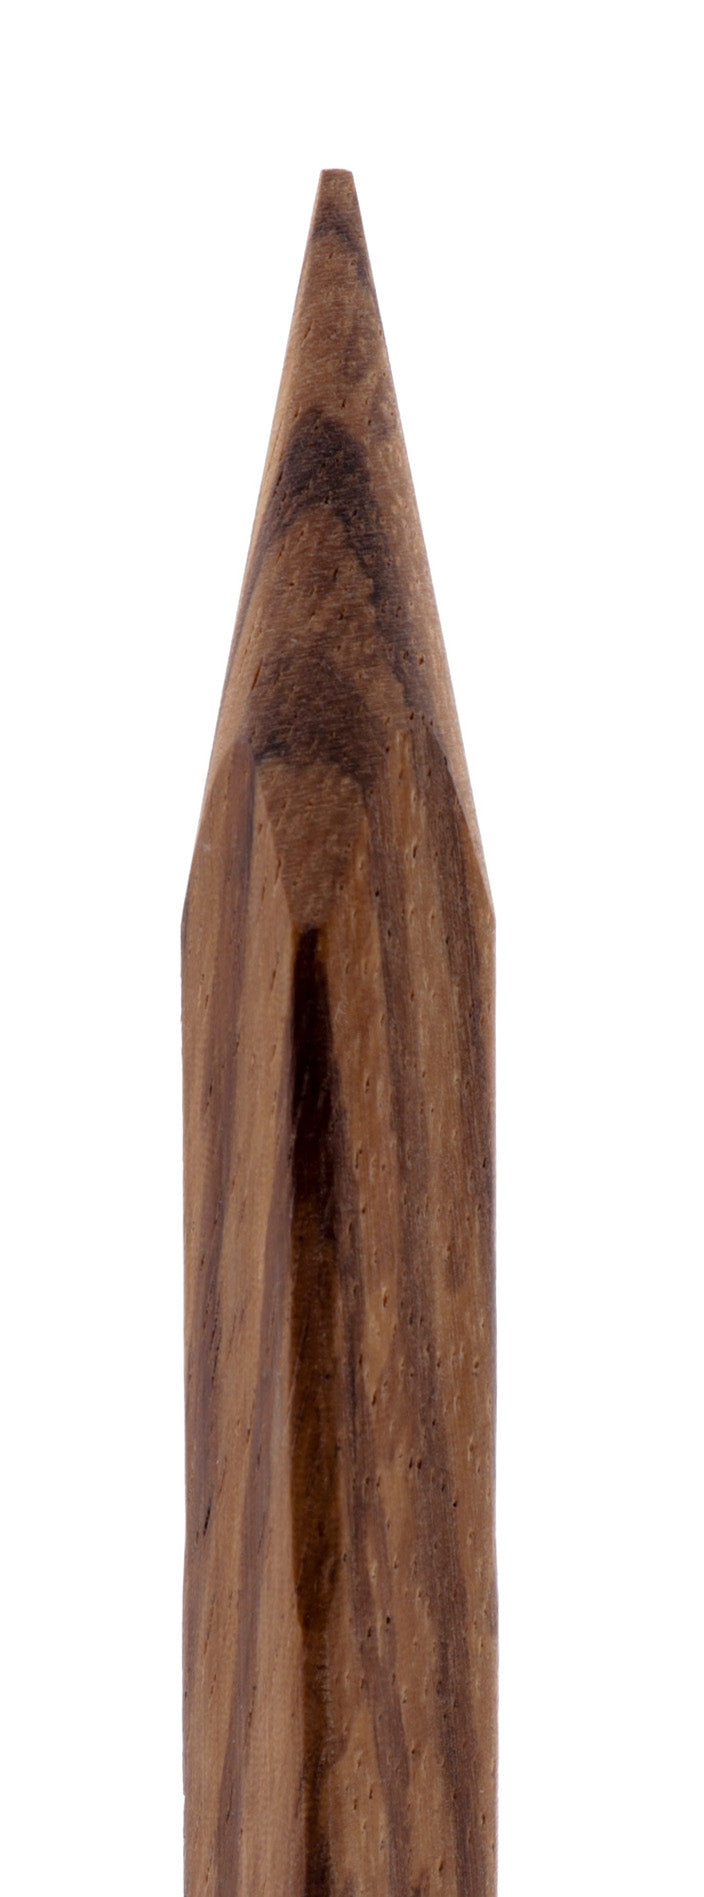 T12 Ballpoint Pottery Trimming Tool w/ Ballpoint Shaped Handle